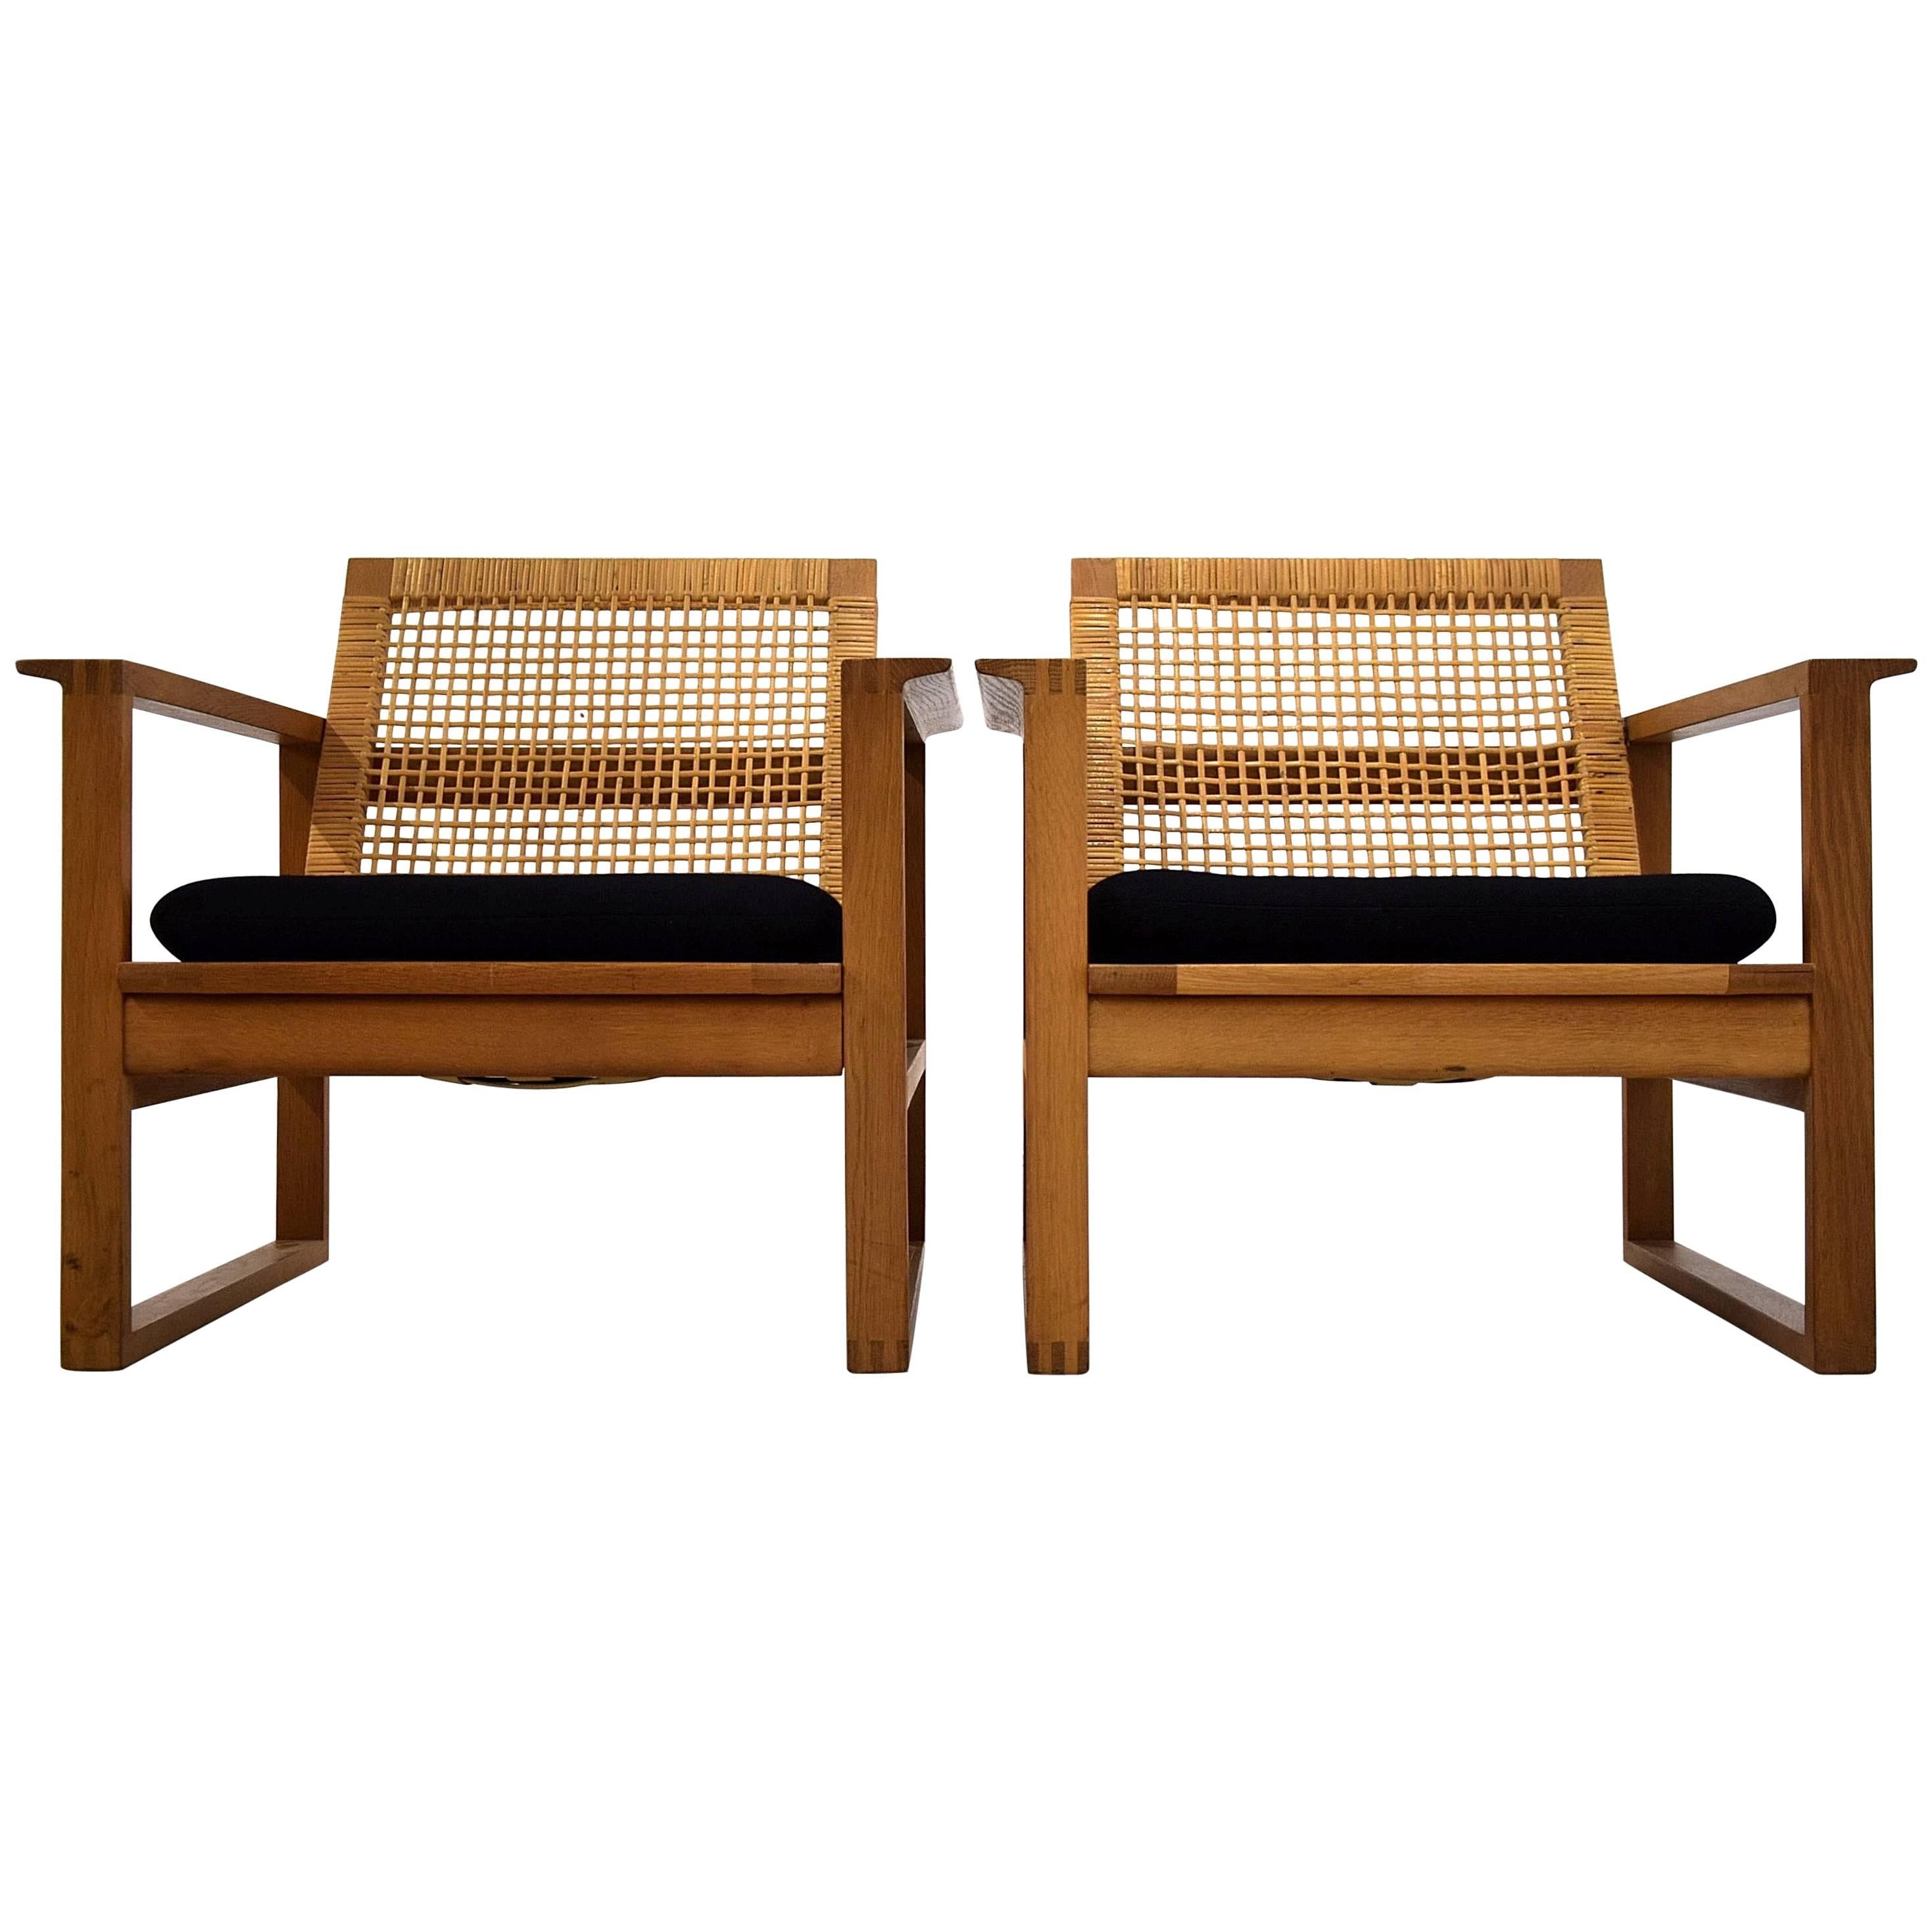 Børge Mogensen, Pair of Oak and Cane Lounge Chairs